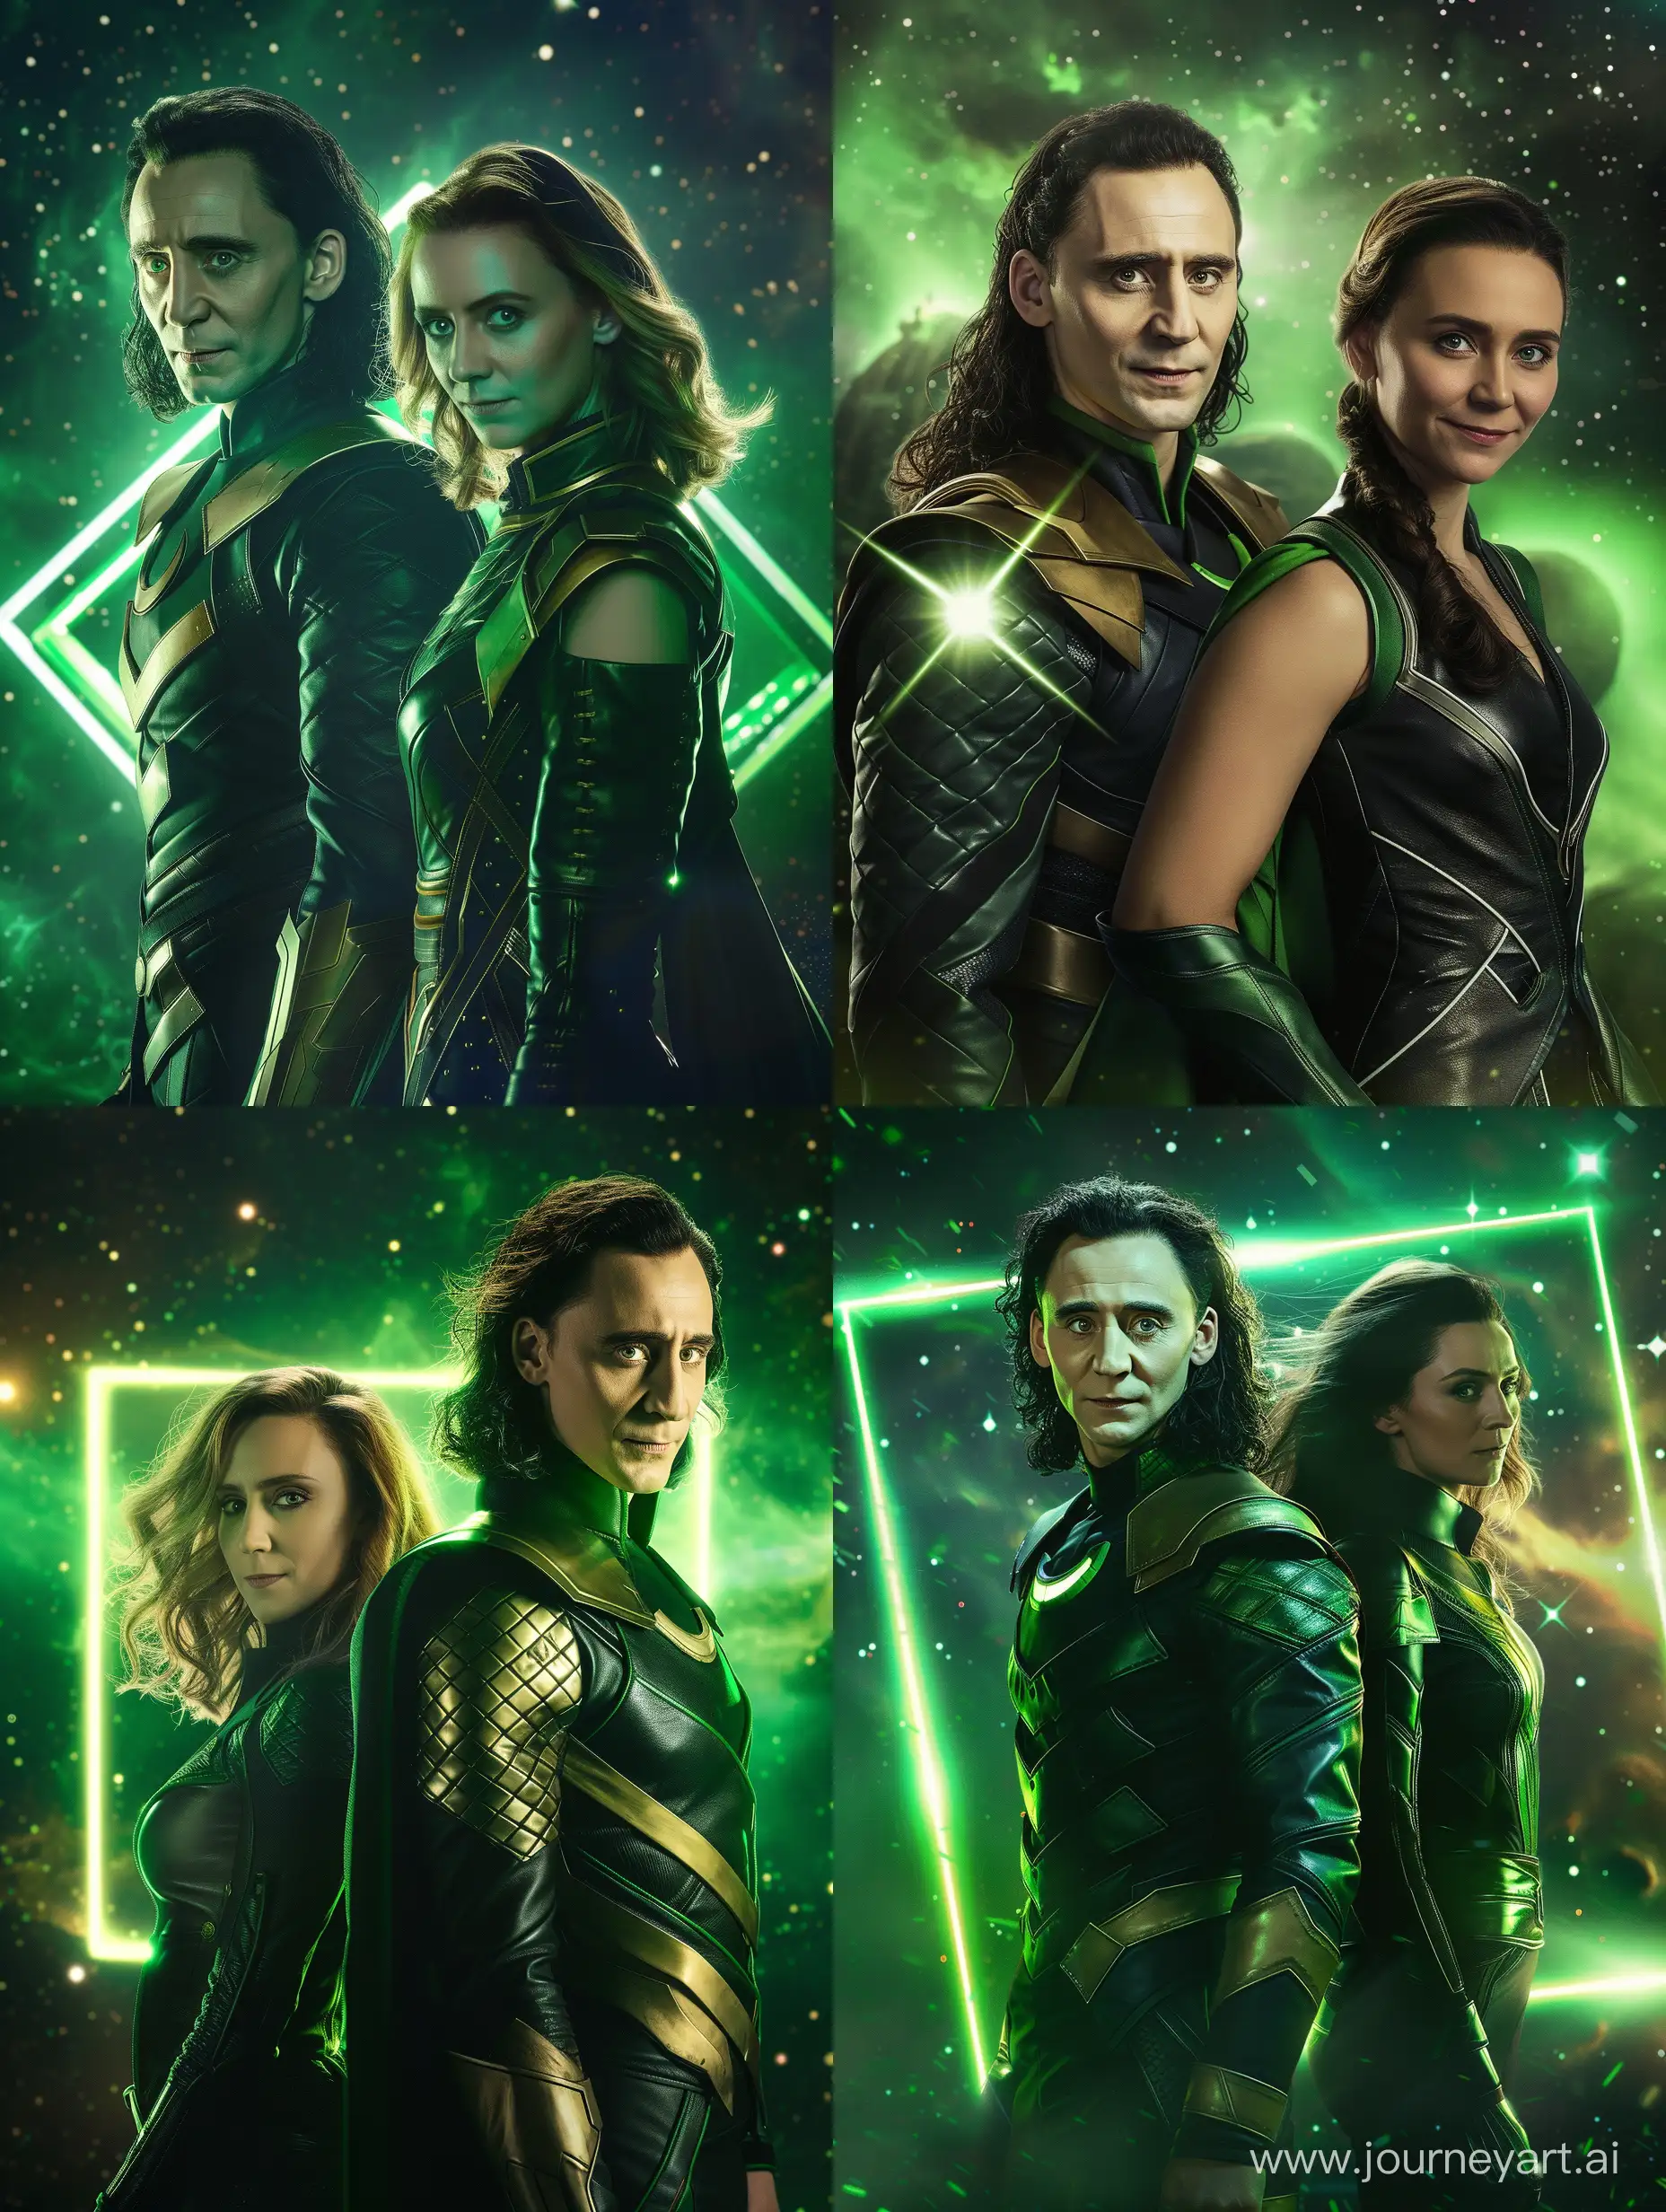 Loki Tom Hiddleston and Loki's girlfriend Sylvia (actress Sophie Di Martino) with a light square in a black and green leather superhero costume, against the background of space and green flashes